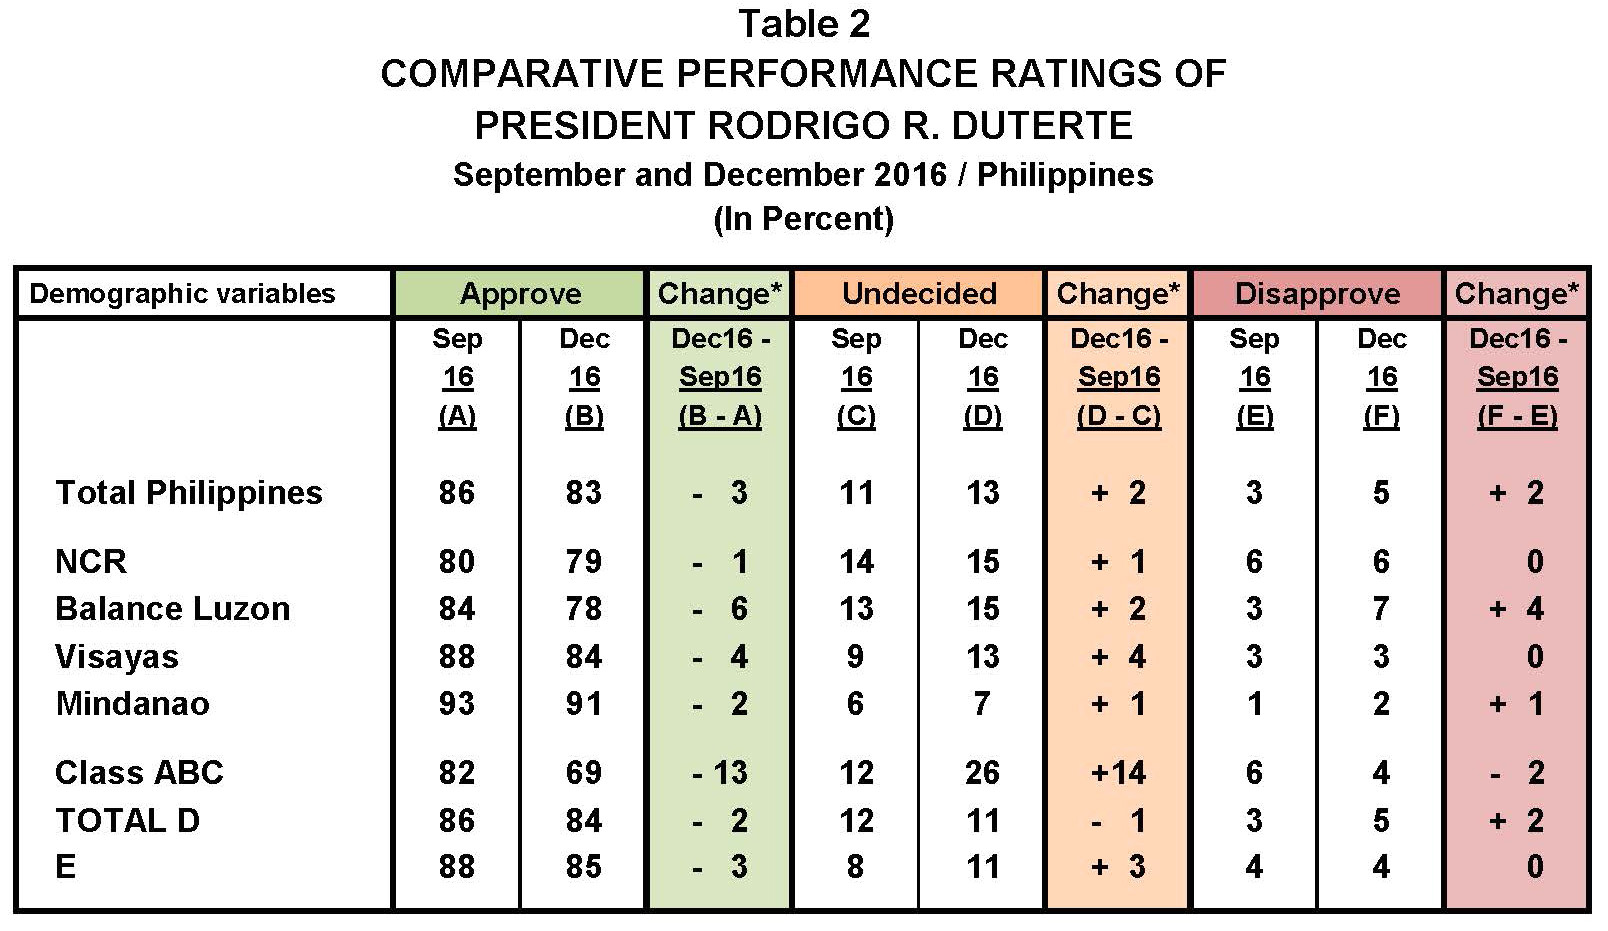 the predominant sentiment toward president duterte in the different geographic areas and socio economic groupings is one of trust 81 to 96 and 85 to 88